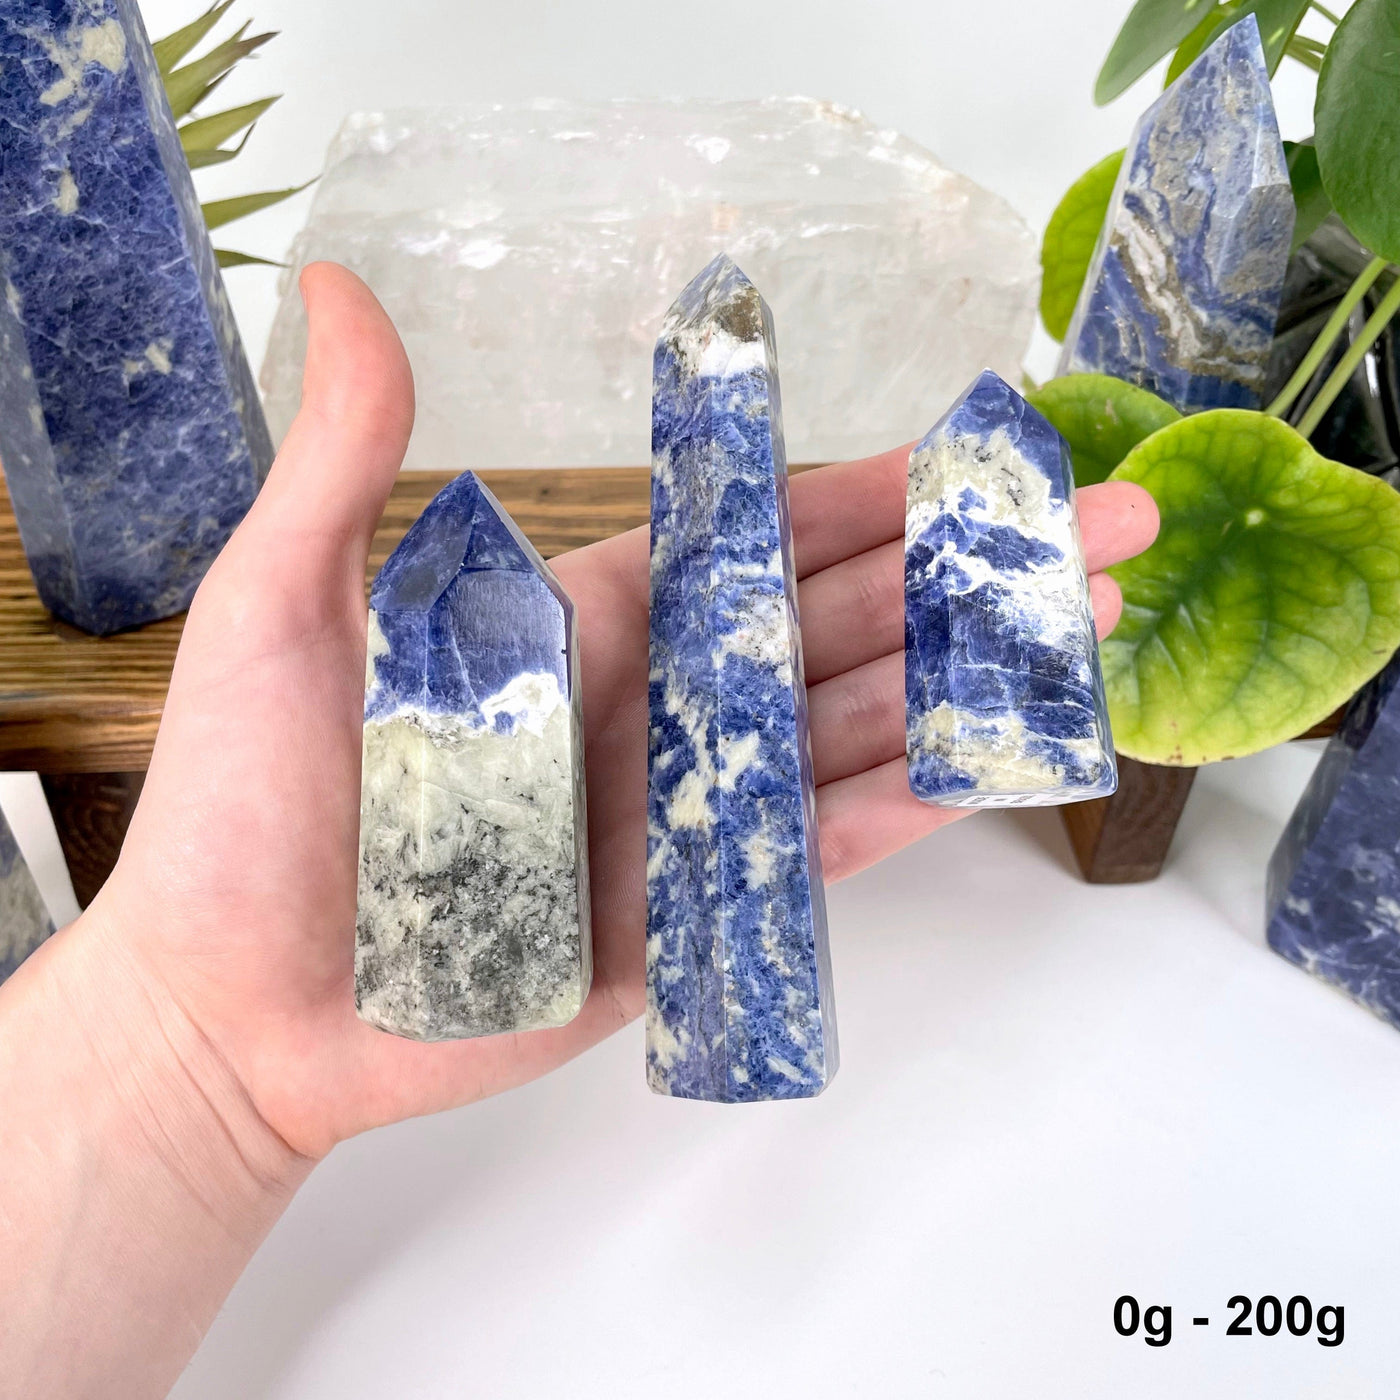 three 0g - 200g sodalite polished points in hand for size reference and possible variations